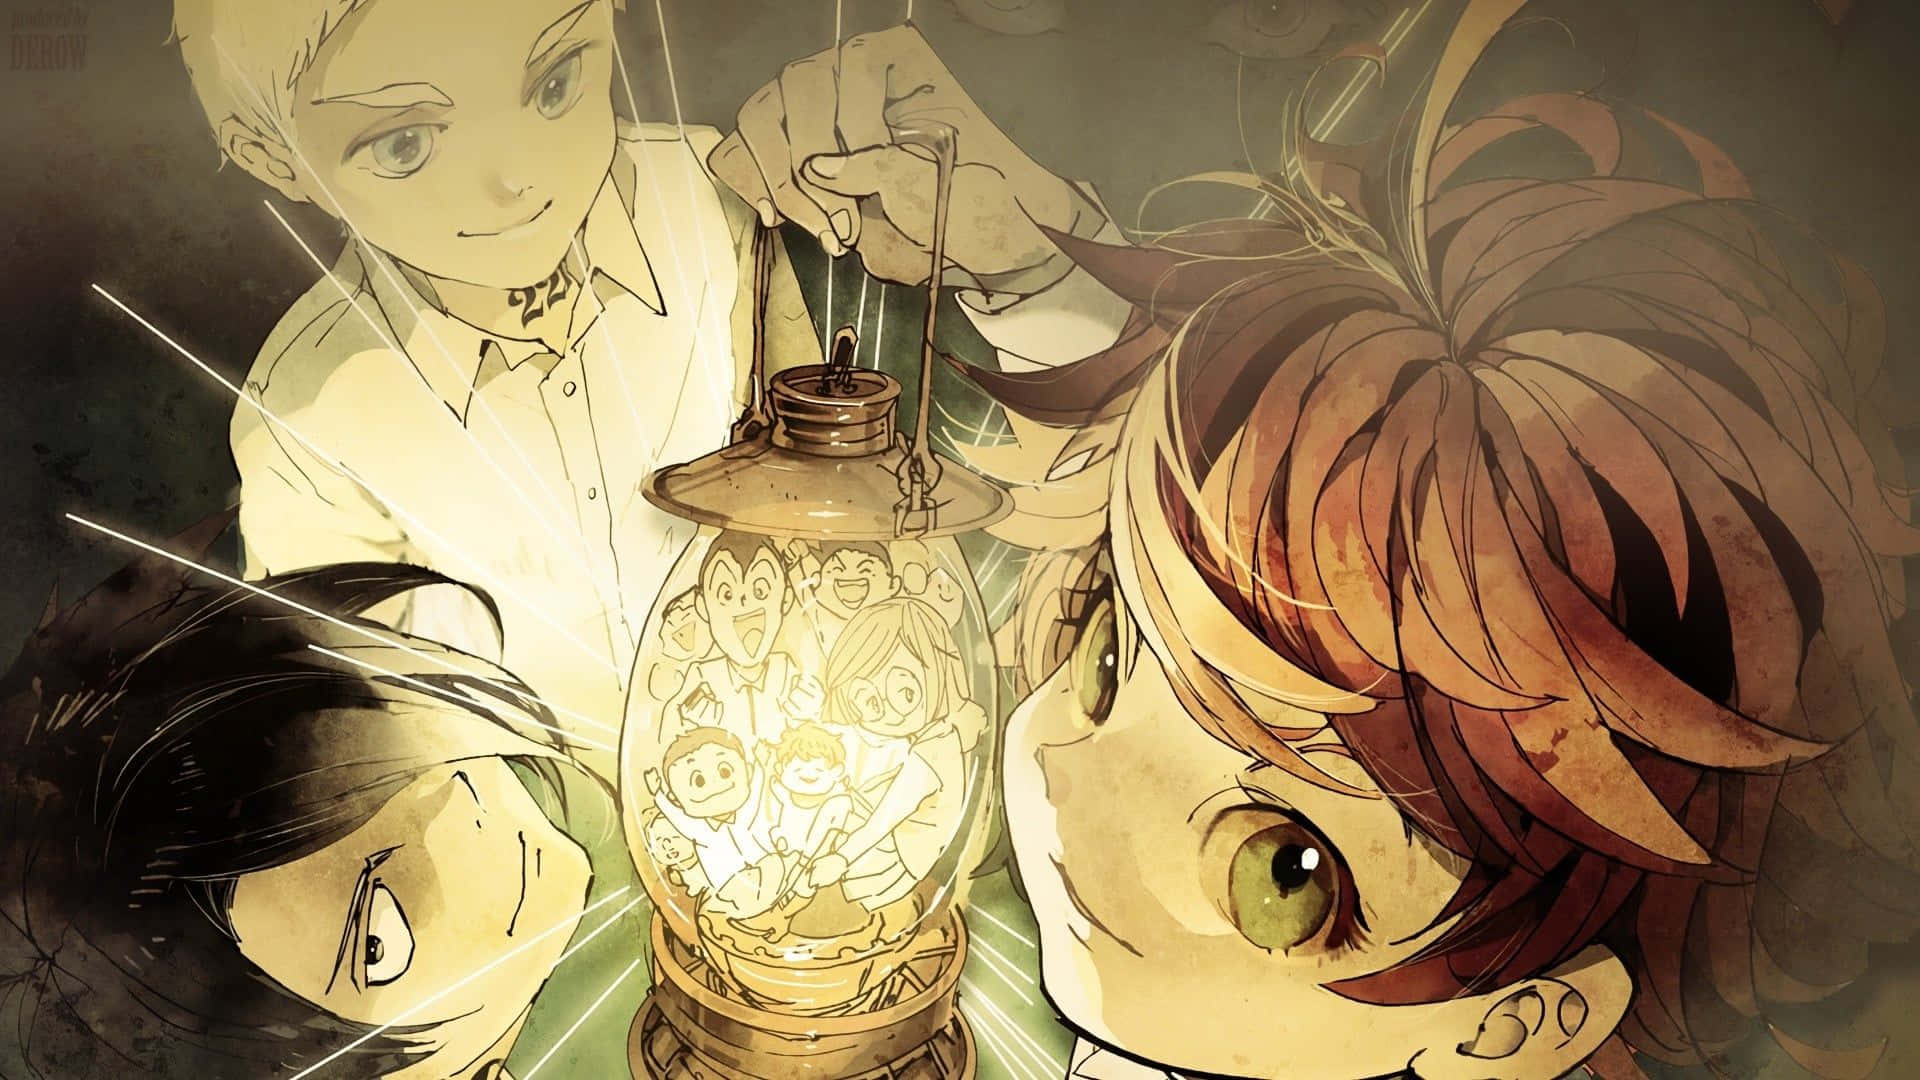 Emma from The Promised Neverland standing victorious Wallpaper